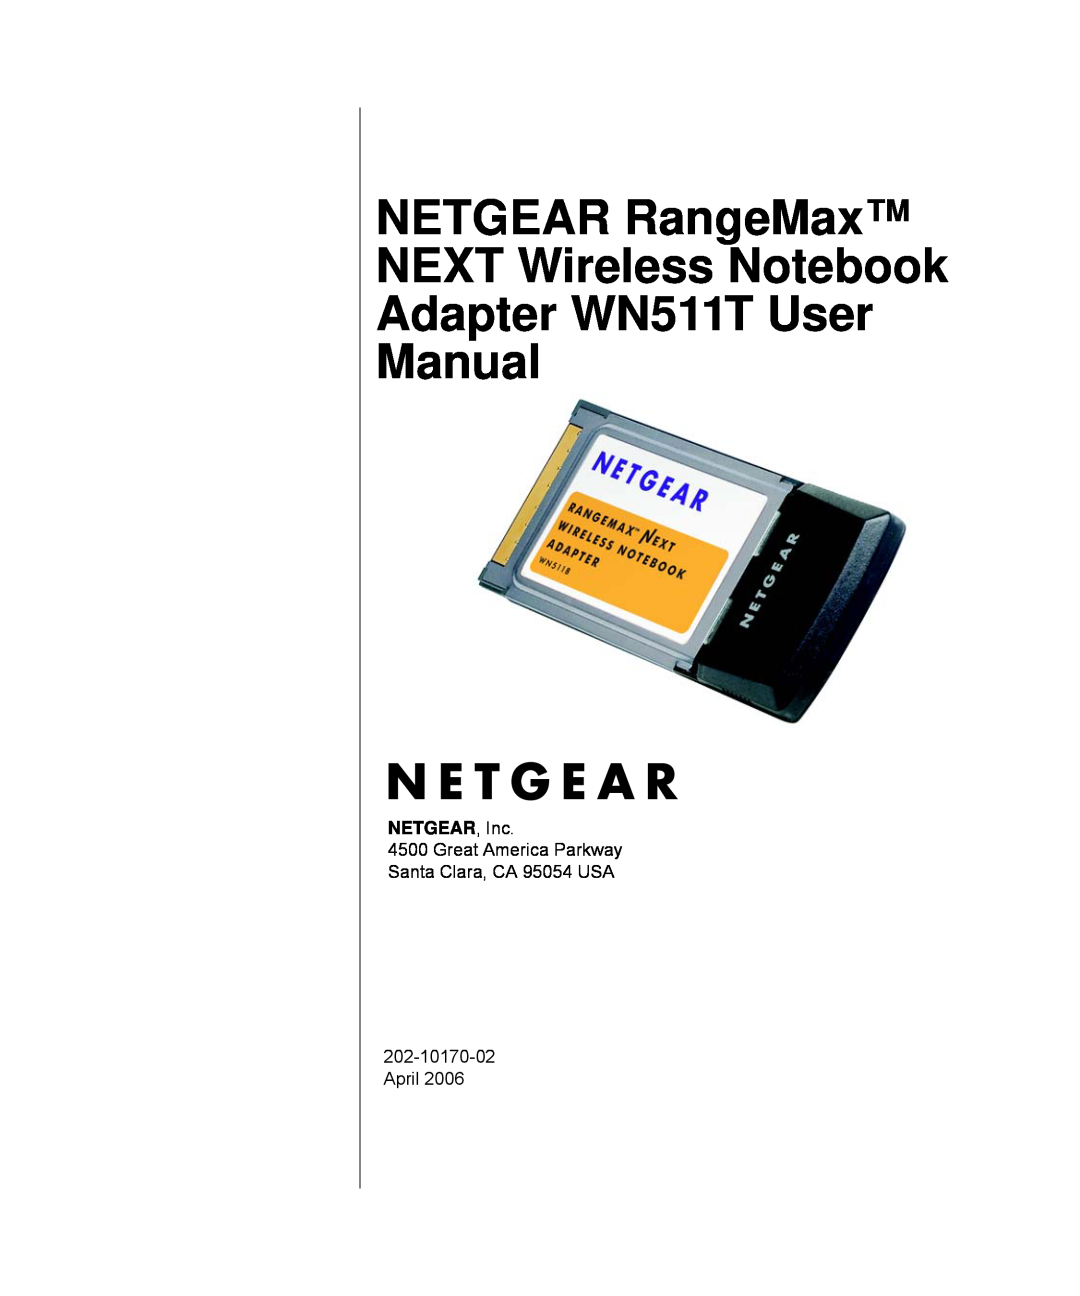 NETGEAR user manual Windows XP Installation, First, install the WN511T software, Connection Indicator, Description 